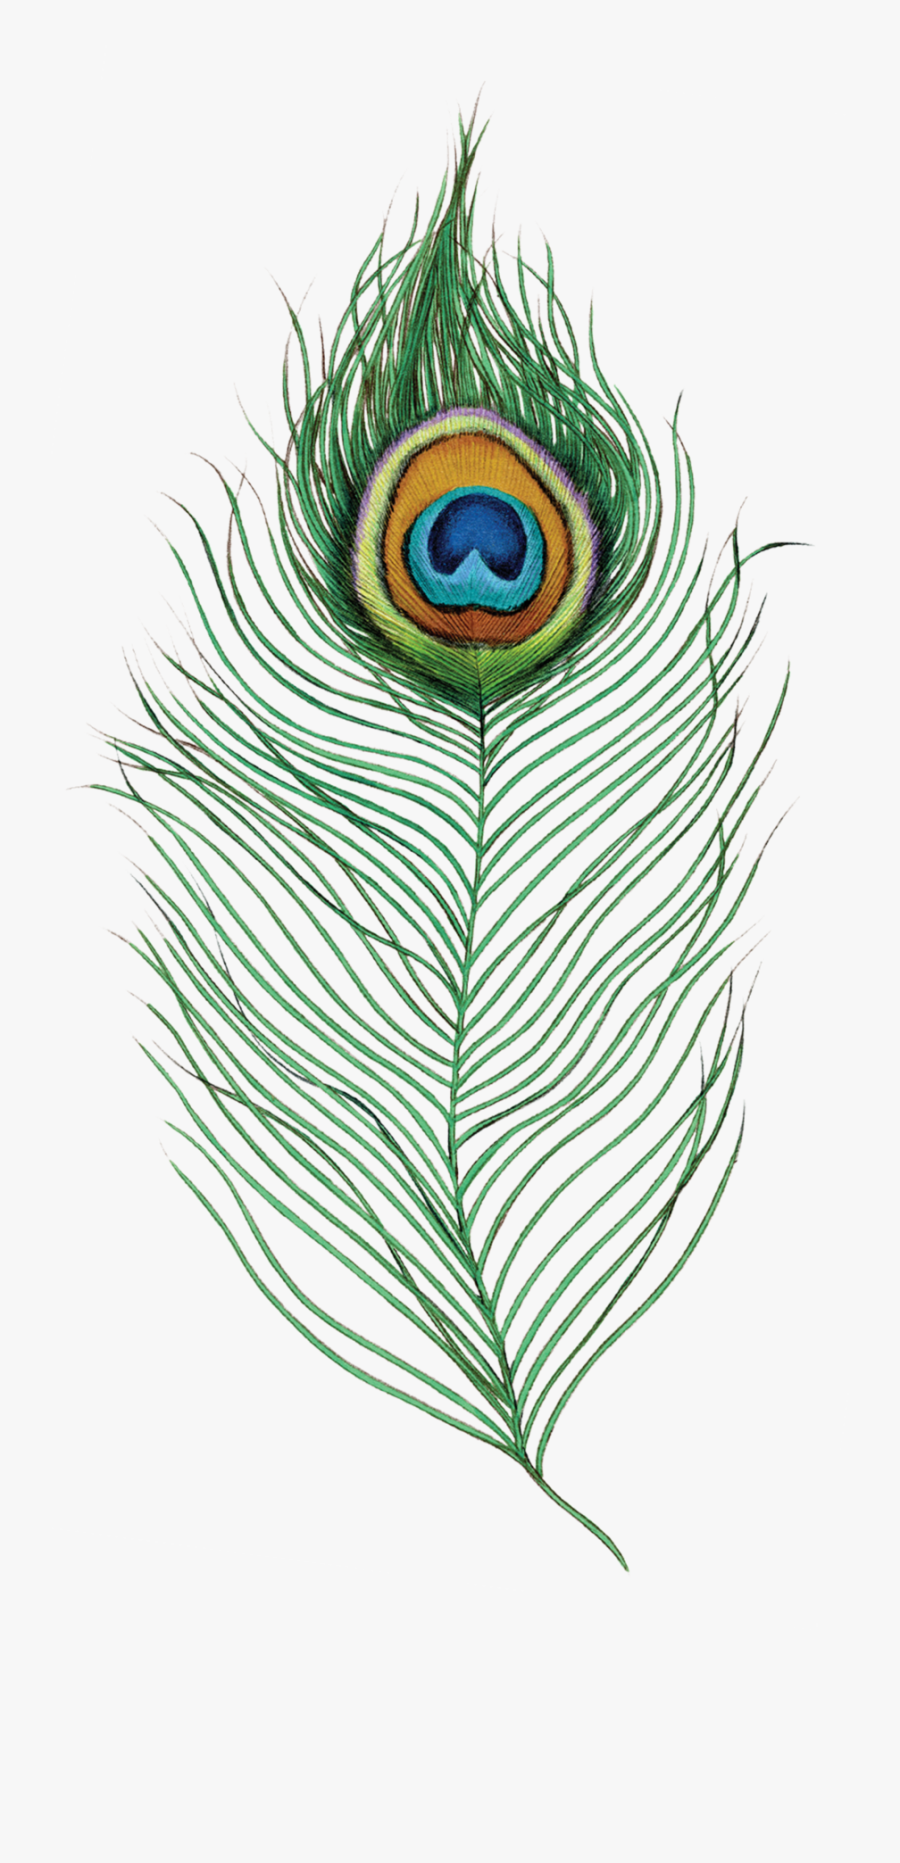 Peacock Feather - Peacock Feather Png Transparent, Transparent Clipart